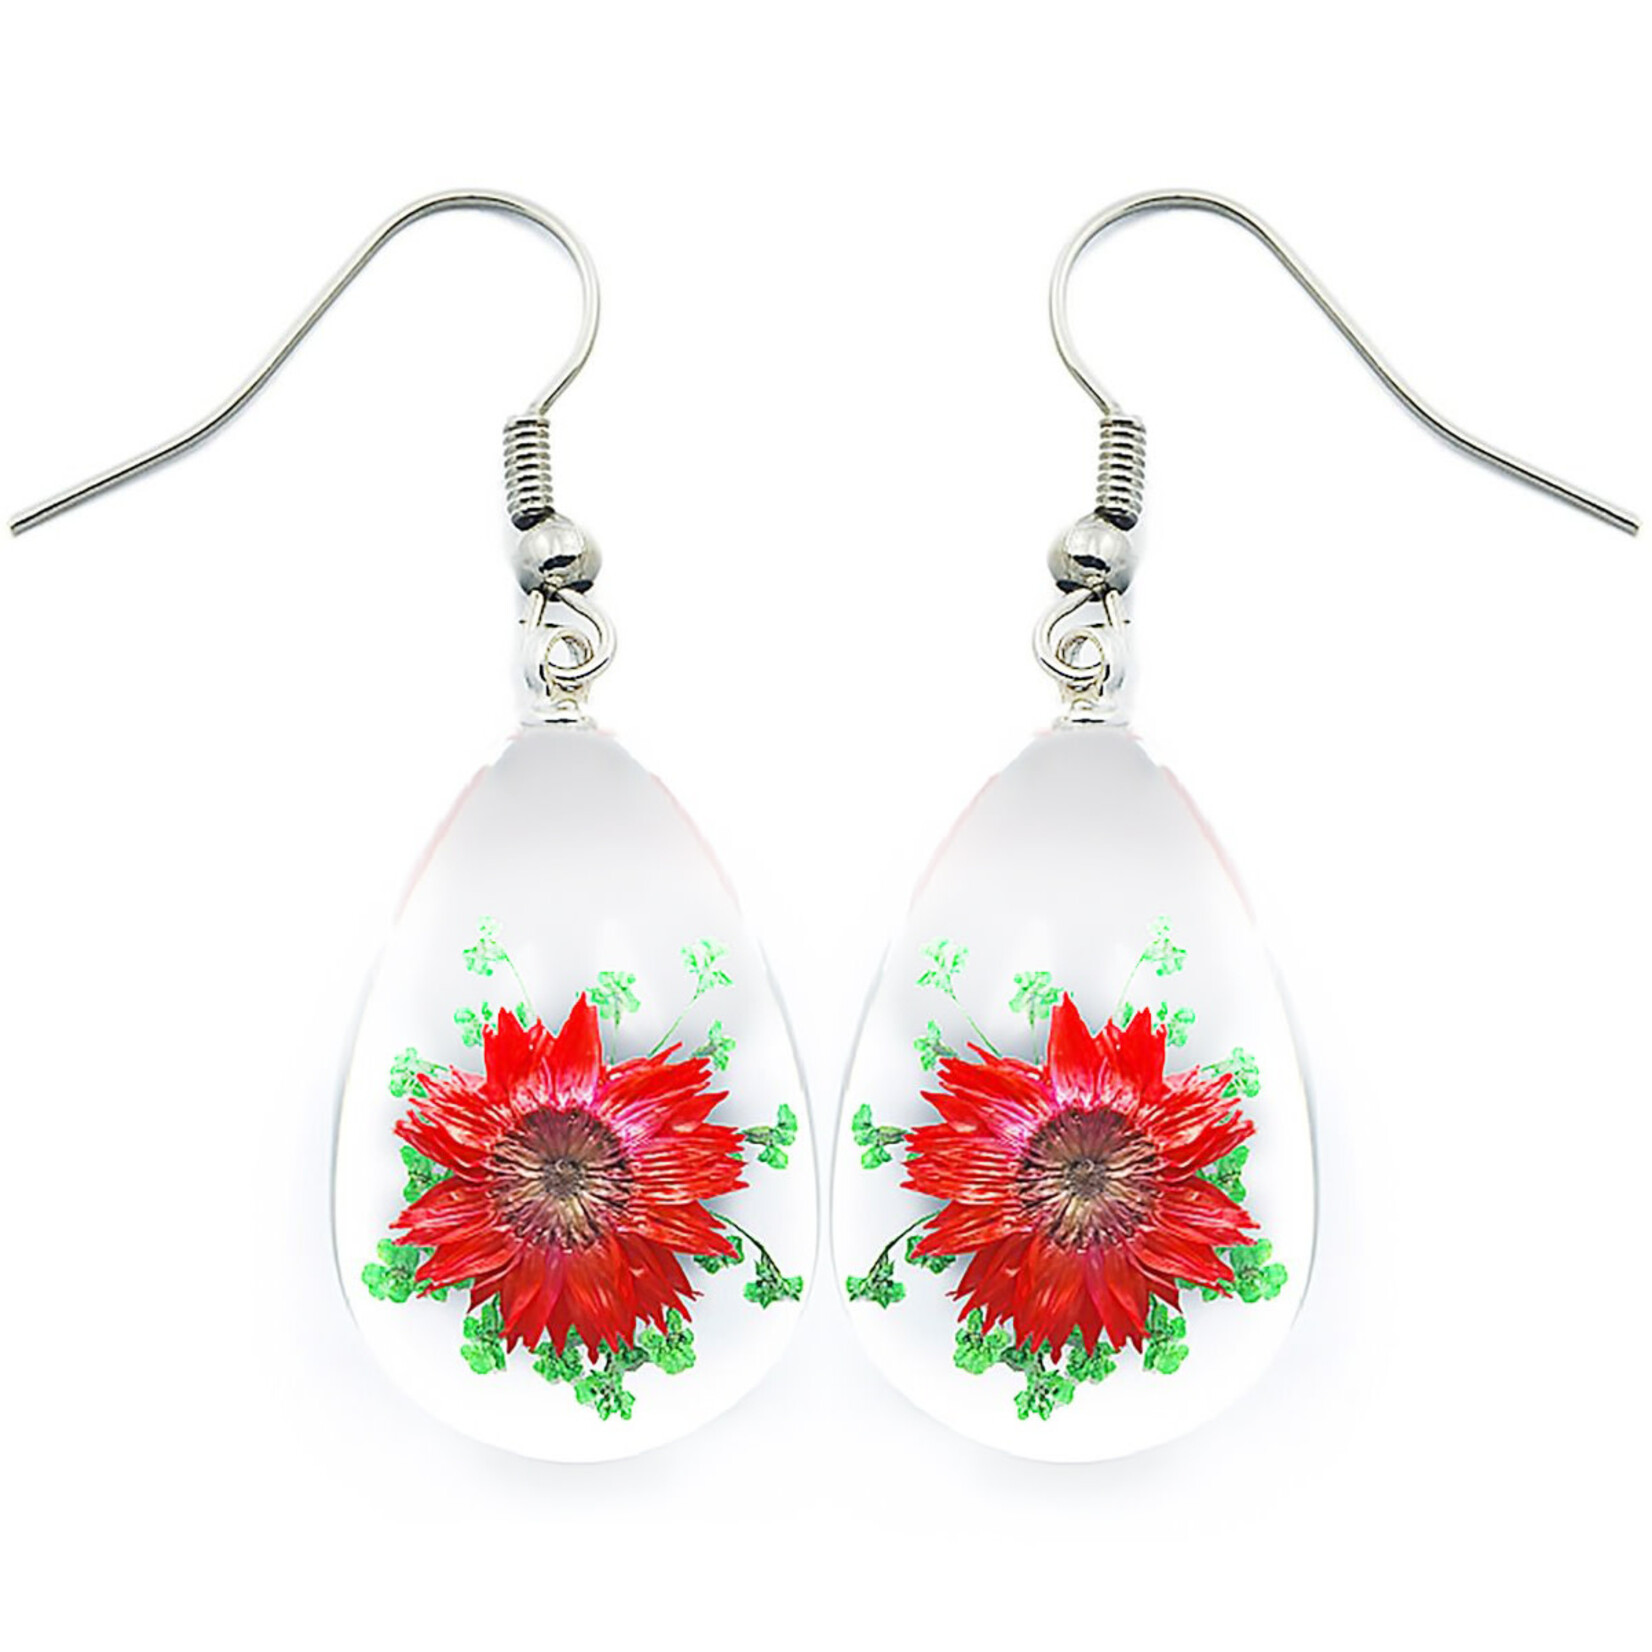 BicBugs Real Preserved Flower Earrings Clear - Red/Green